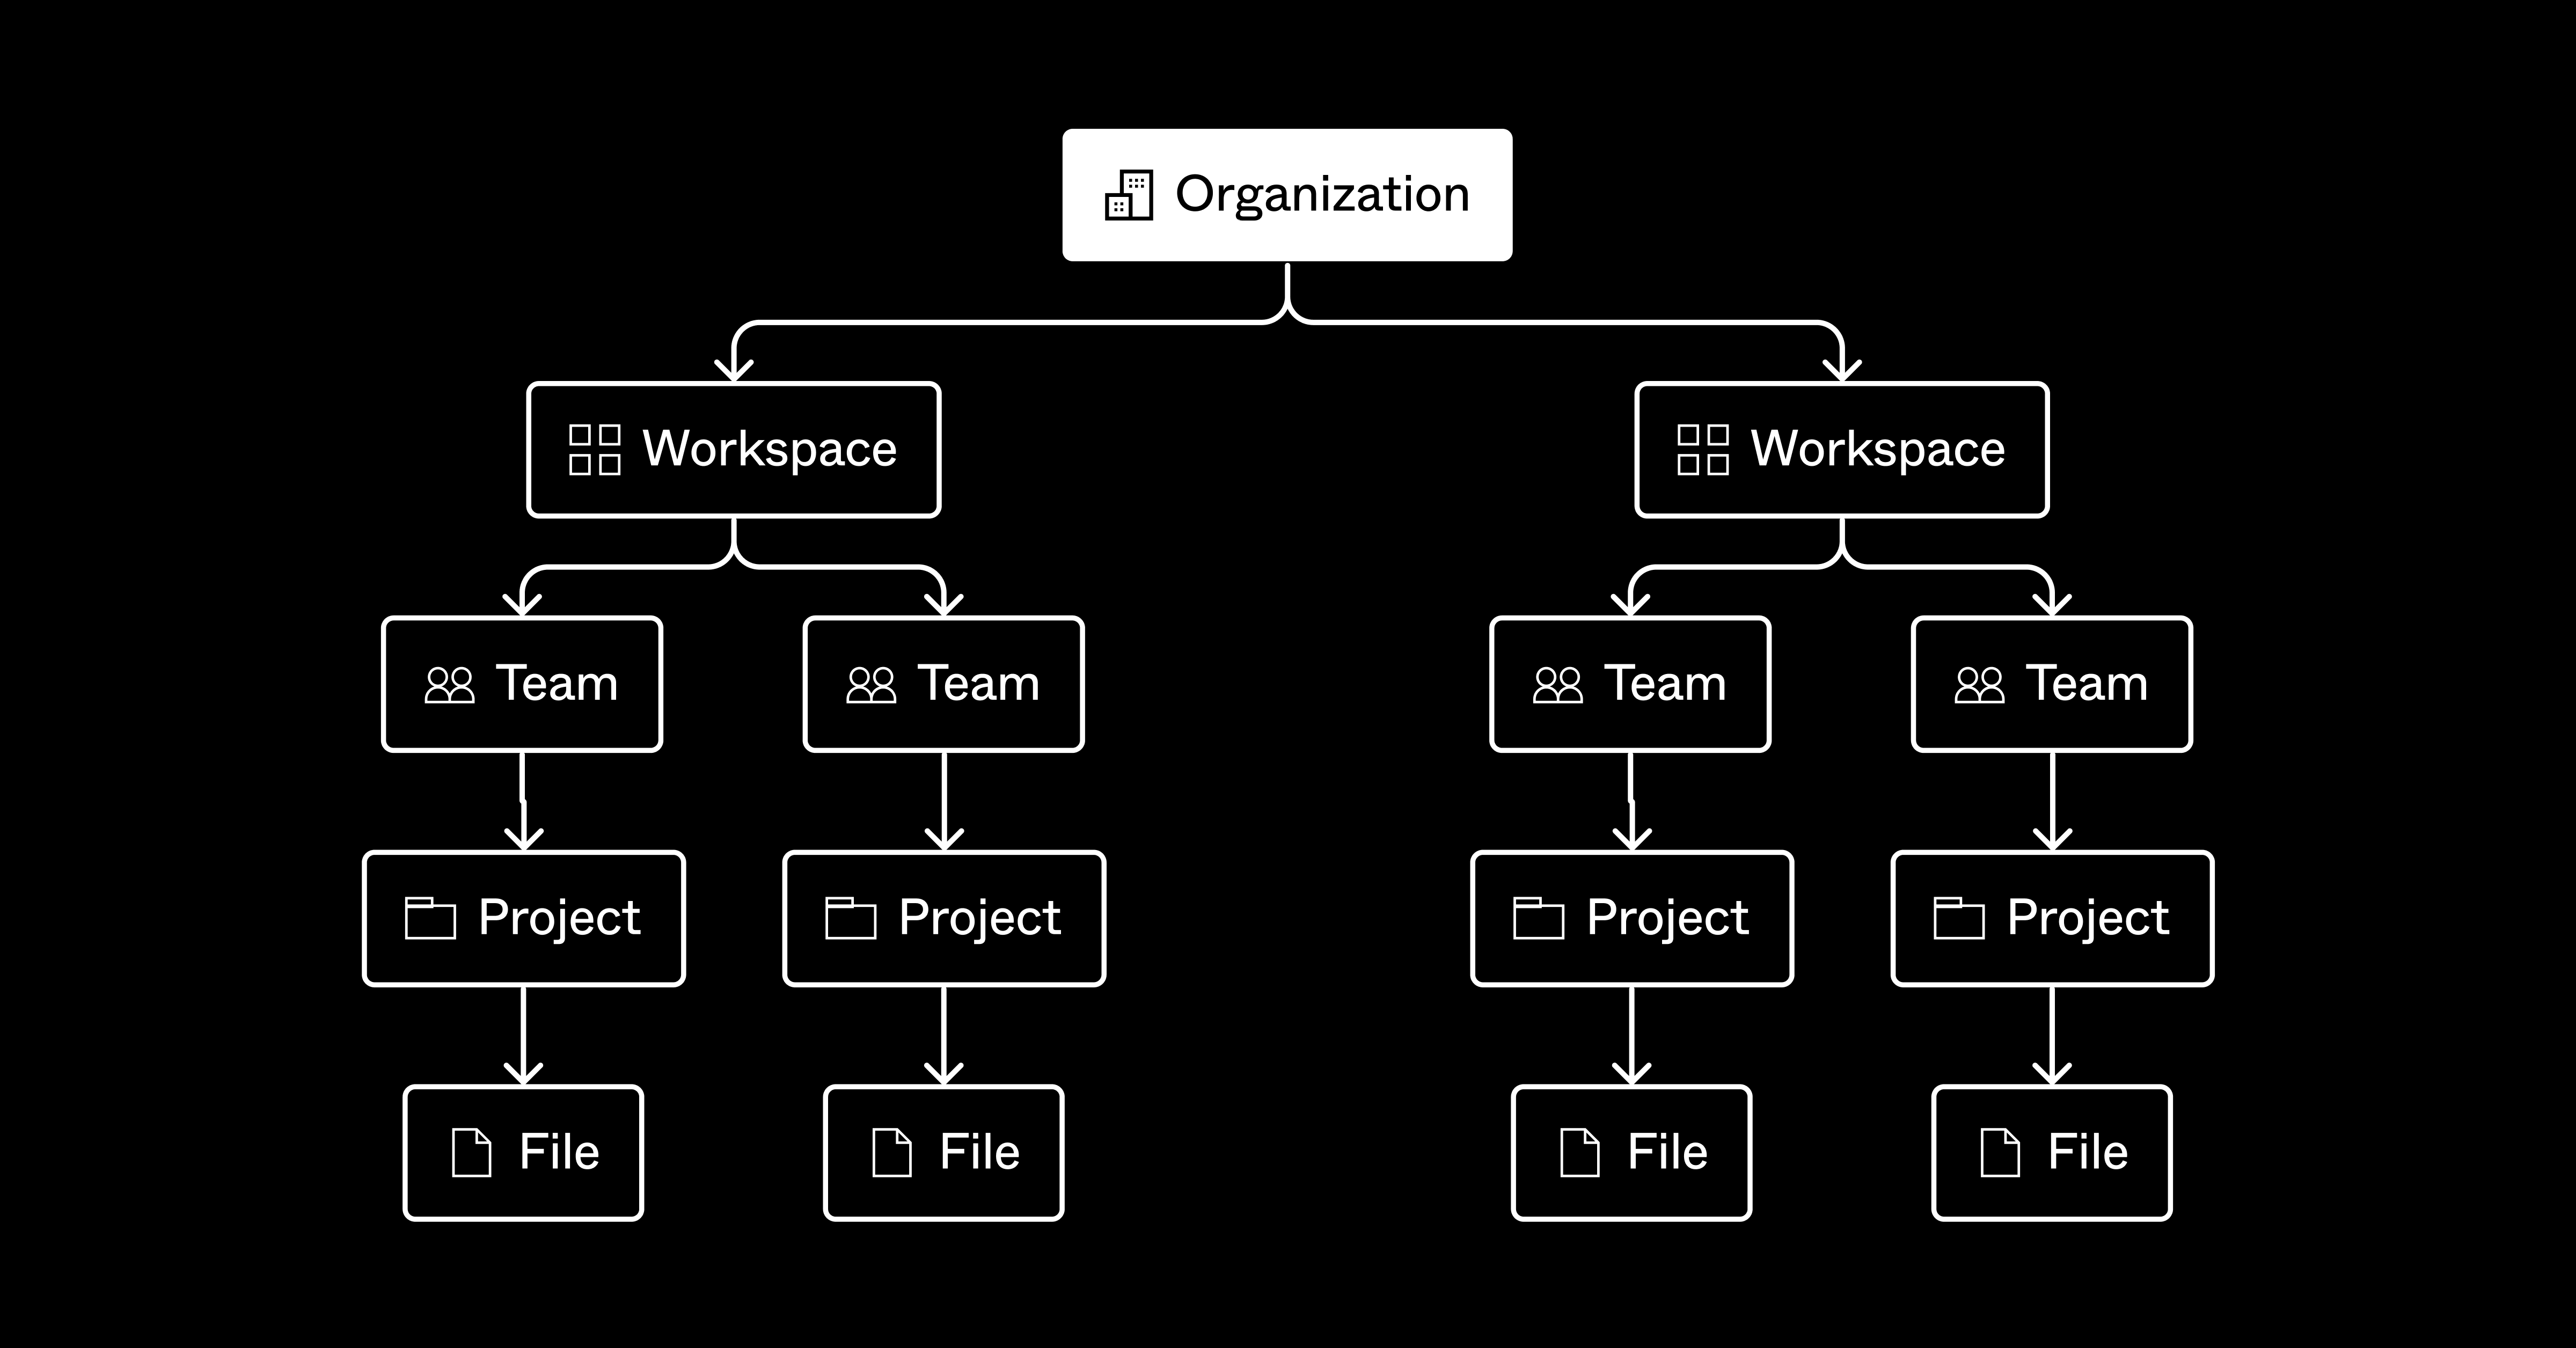 A visual representation of the Figma organizational structure. From top to bottom, the labels read: organization, workspace, team, project, file.